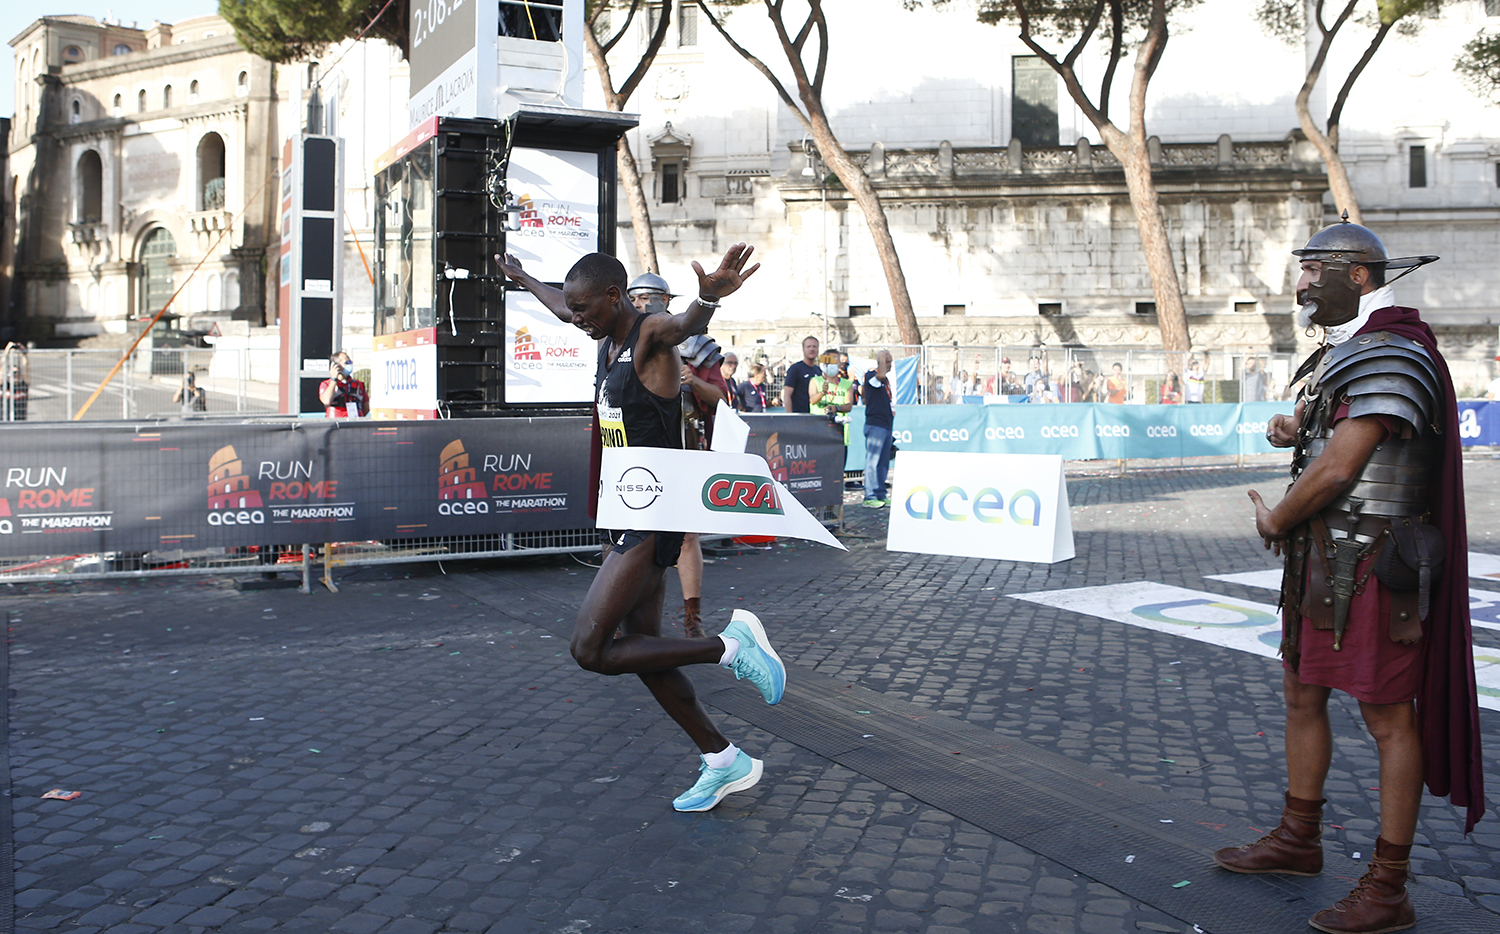 Acea Run Rome The Marathon: the top runners chase the win and the course record